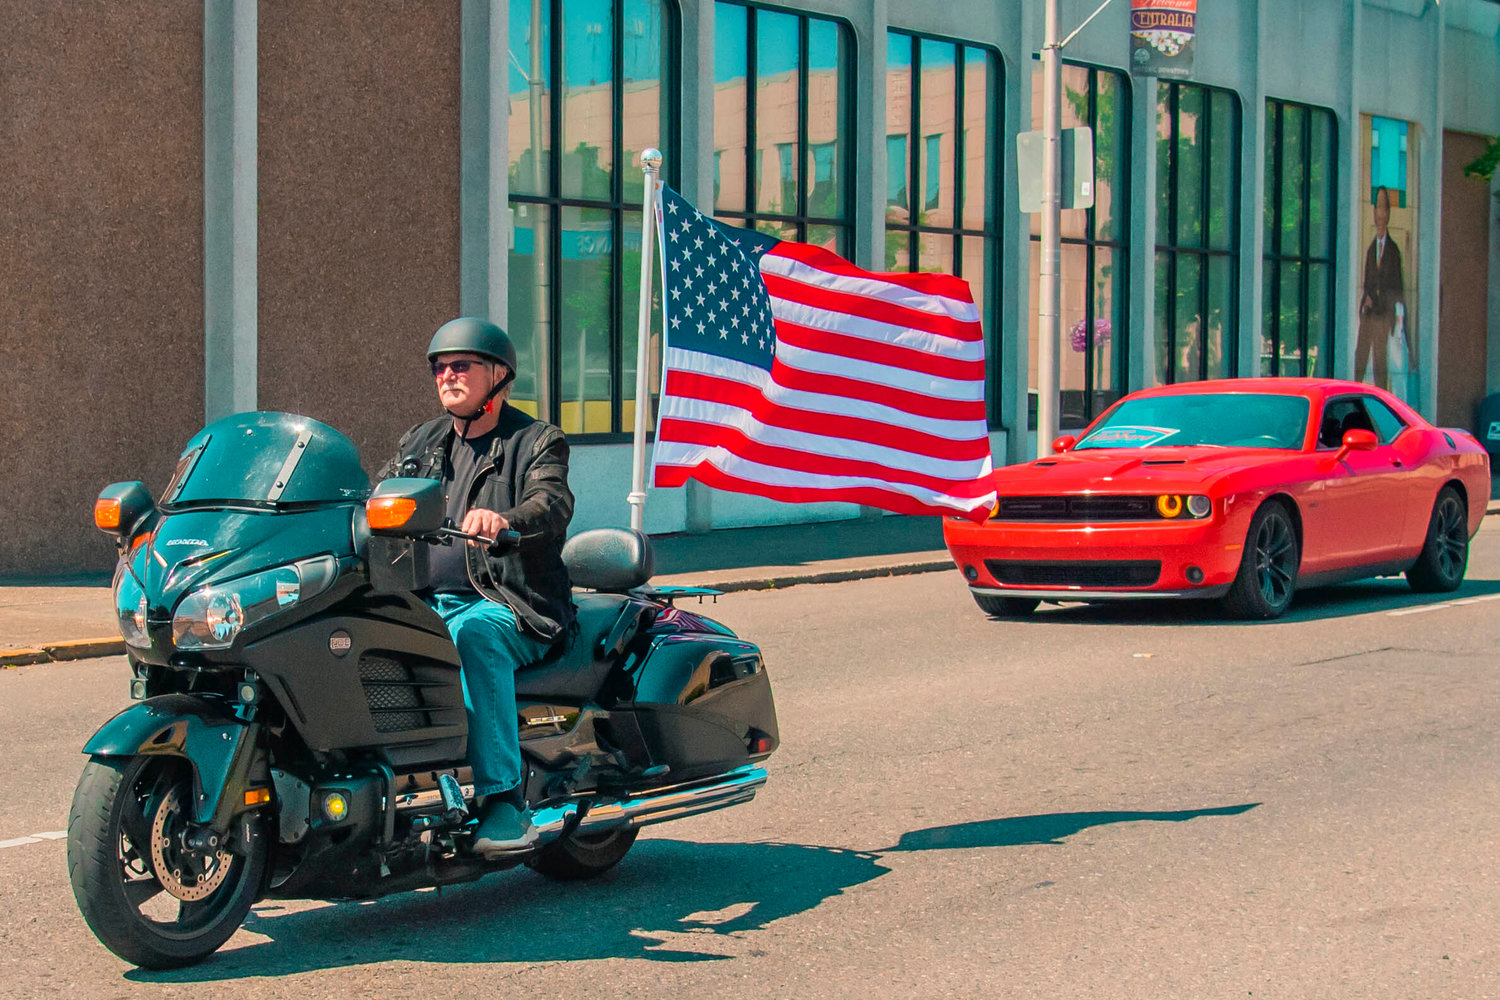 A rider displays an American flag on his motorcycle as he rides through downtown Centralia during a “Patriotic Drive” part of Summerfest in Centralia for Fourth of July, Sunday afternoon.